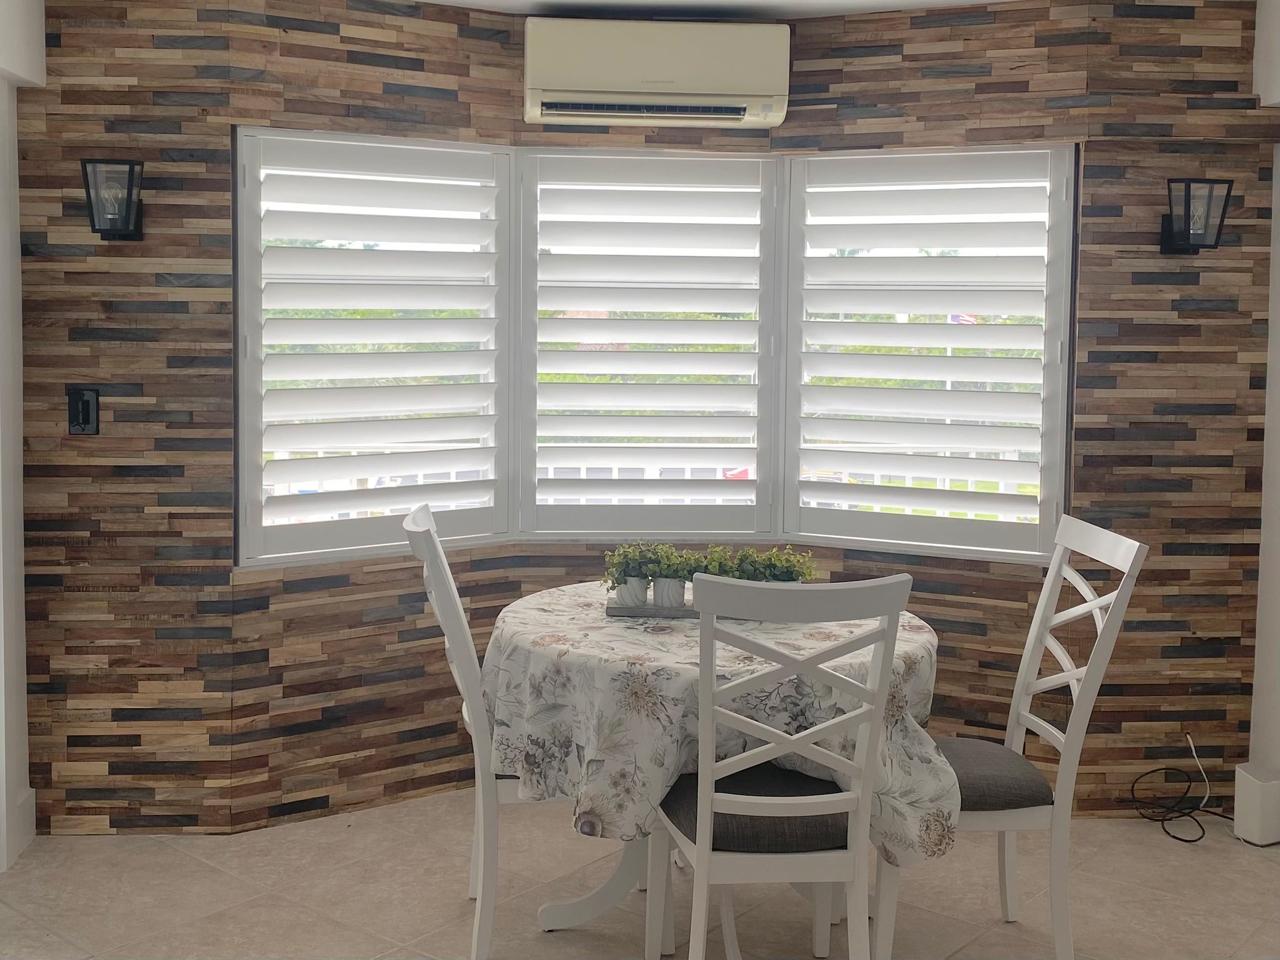 Bay windows with shutters by dining table